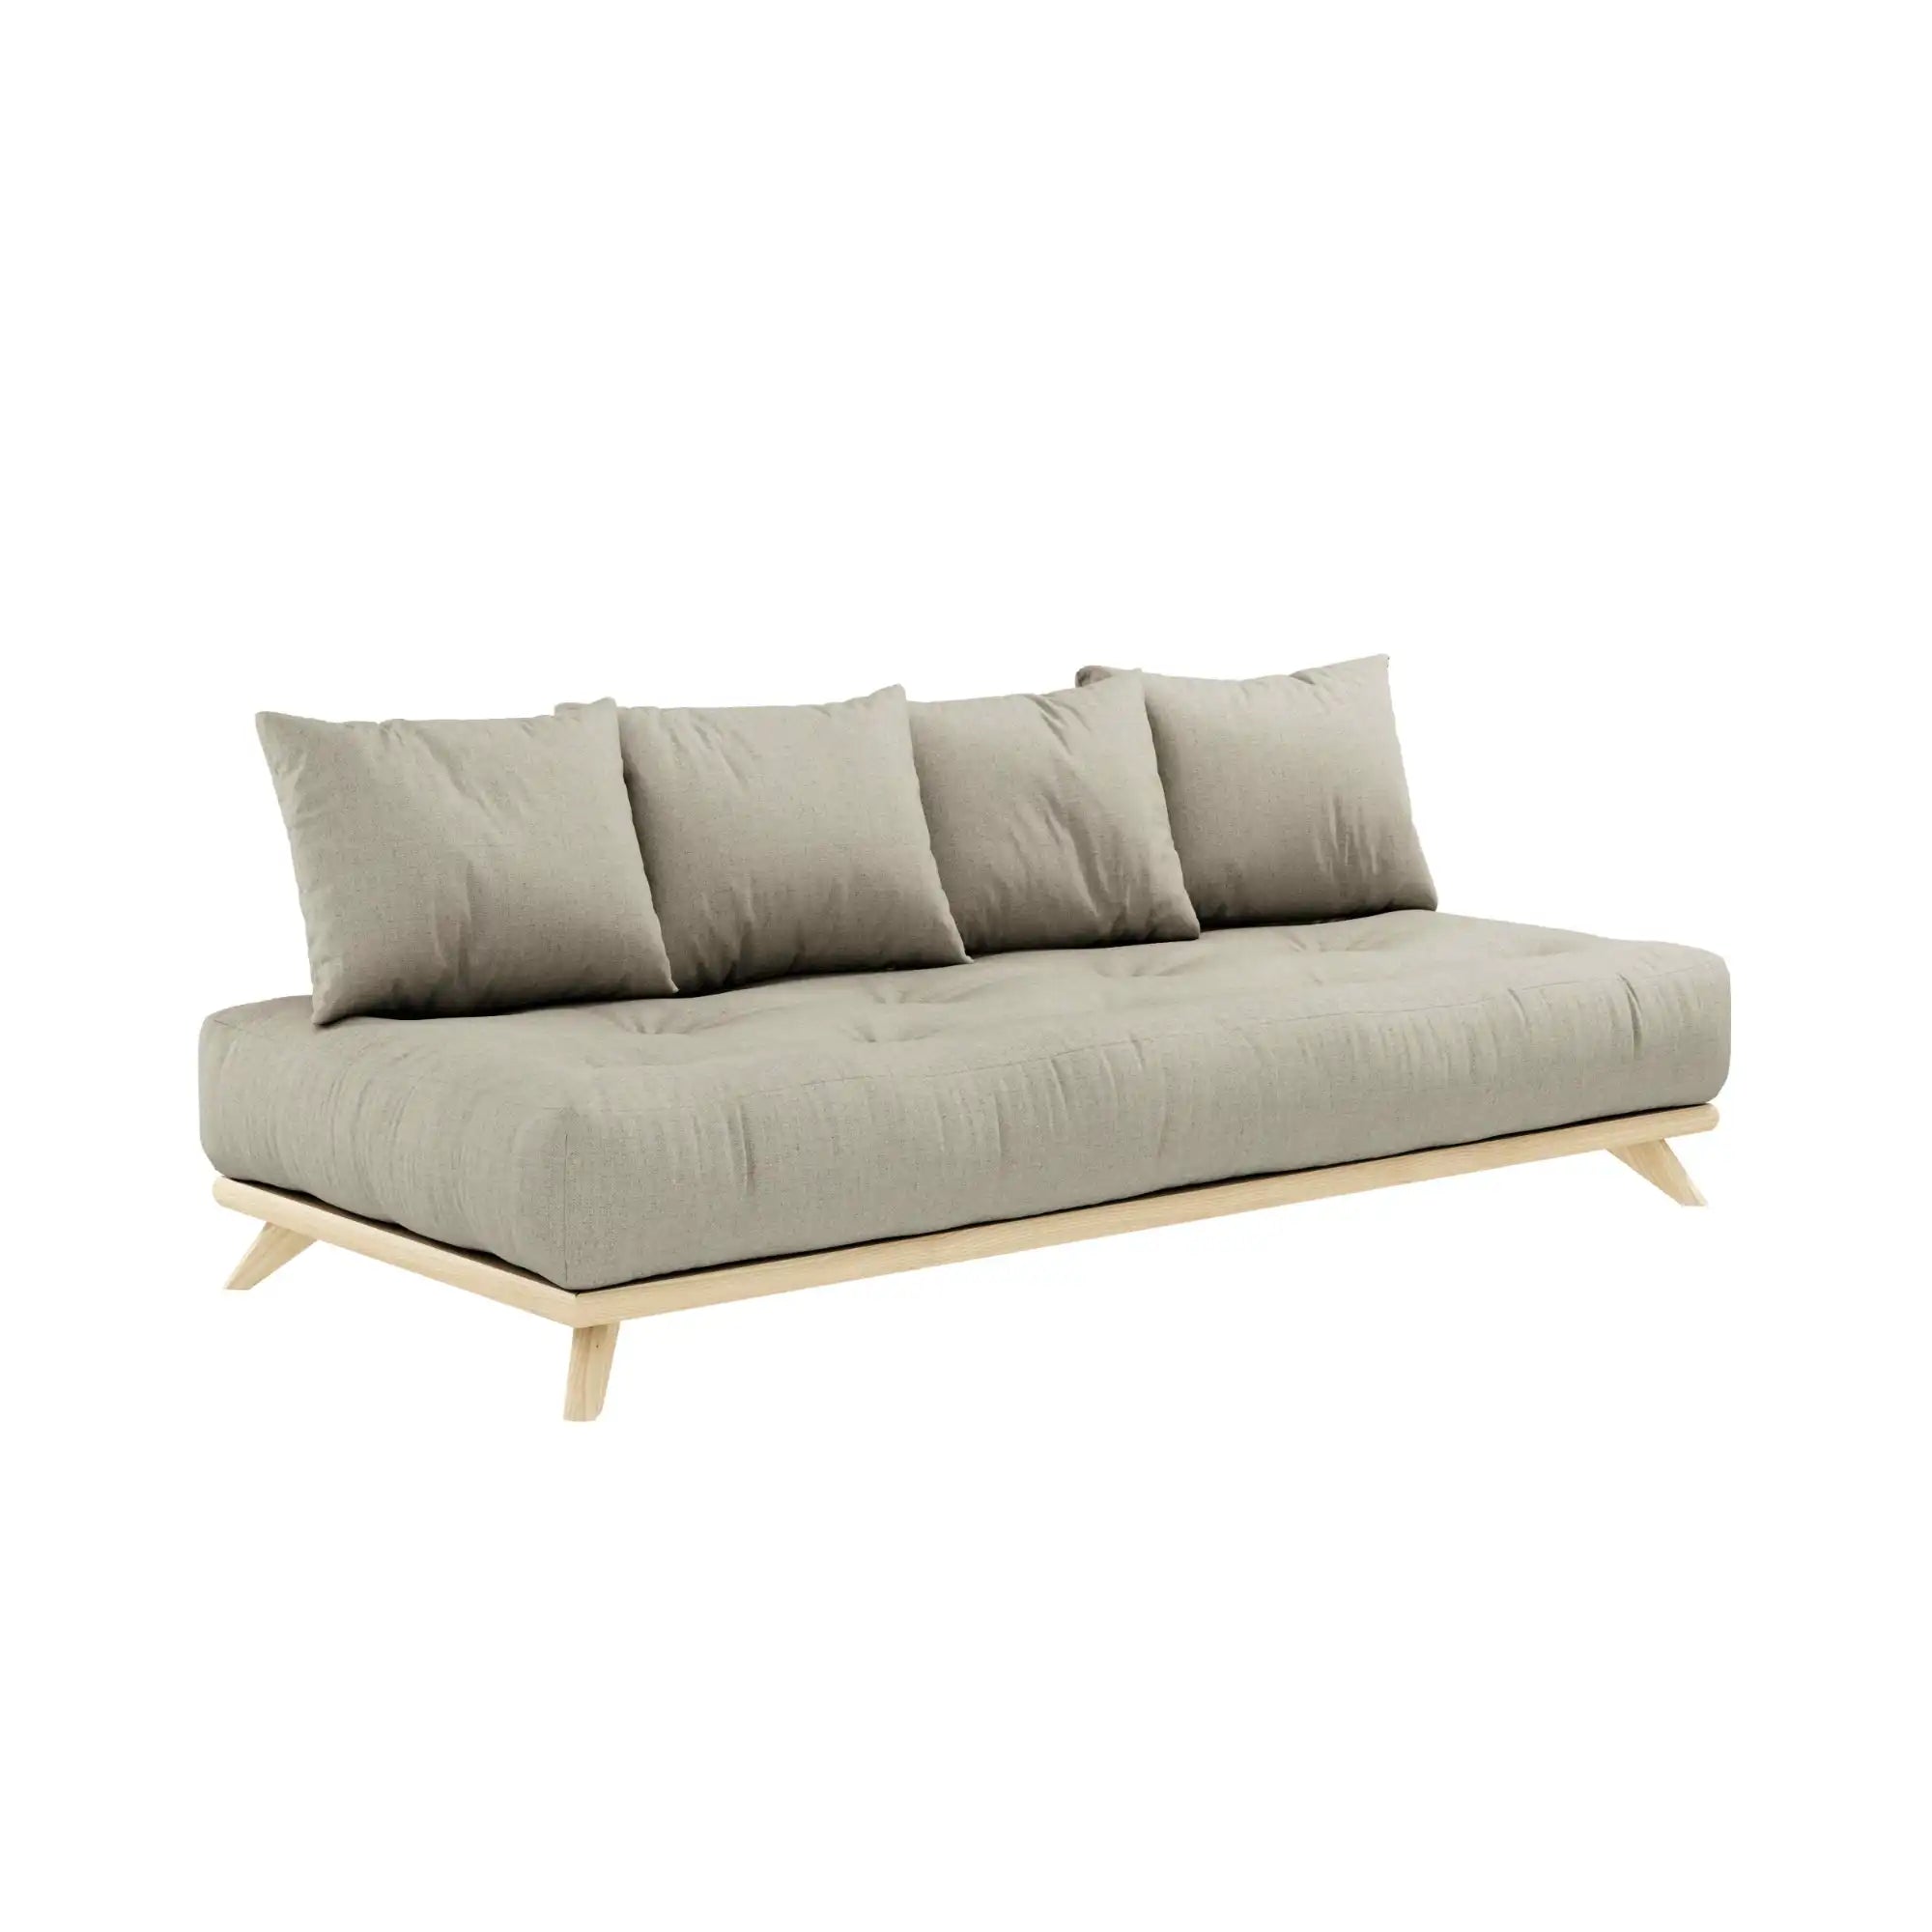 Senza Daybed - THAT COOL LIVING